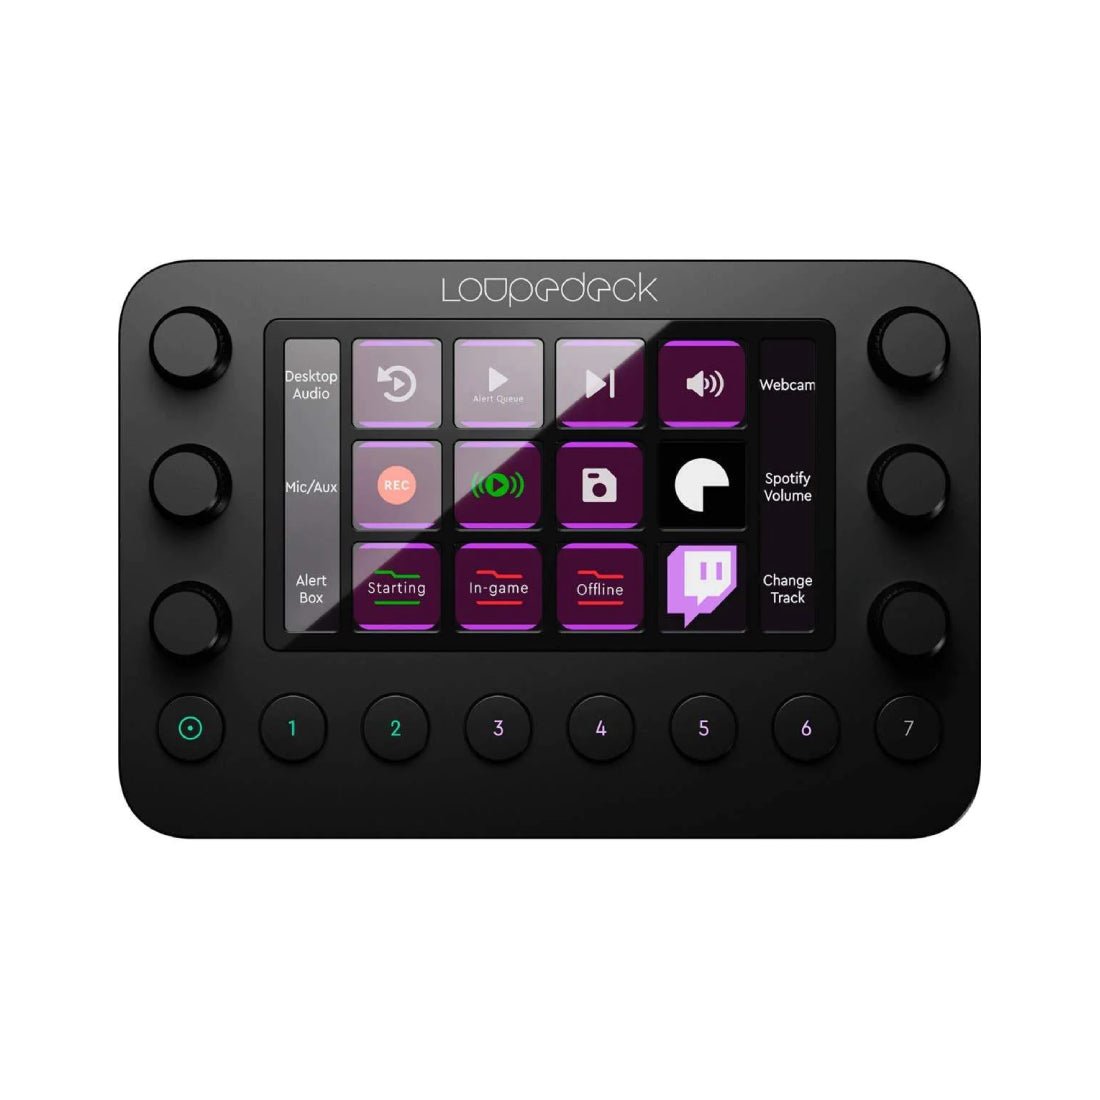 Loupedeck Live Photo/Video Editing and Streaming Console - وحدة تعديل فيديو - Store 974 | ستور ٩٧٤